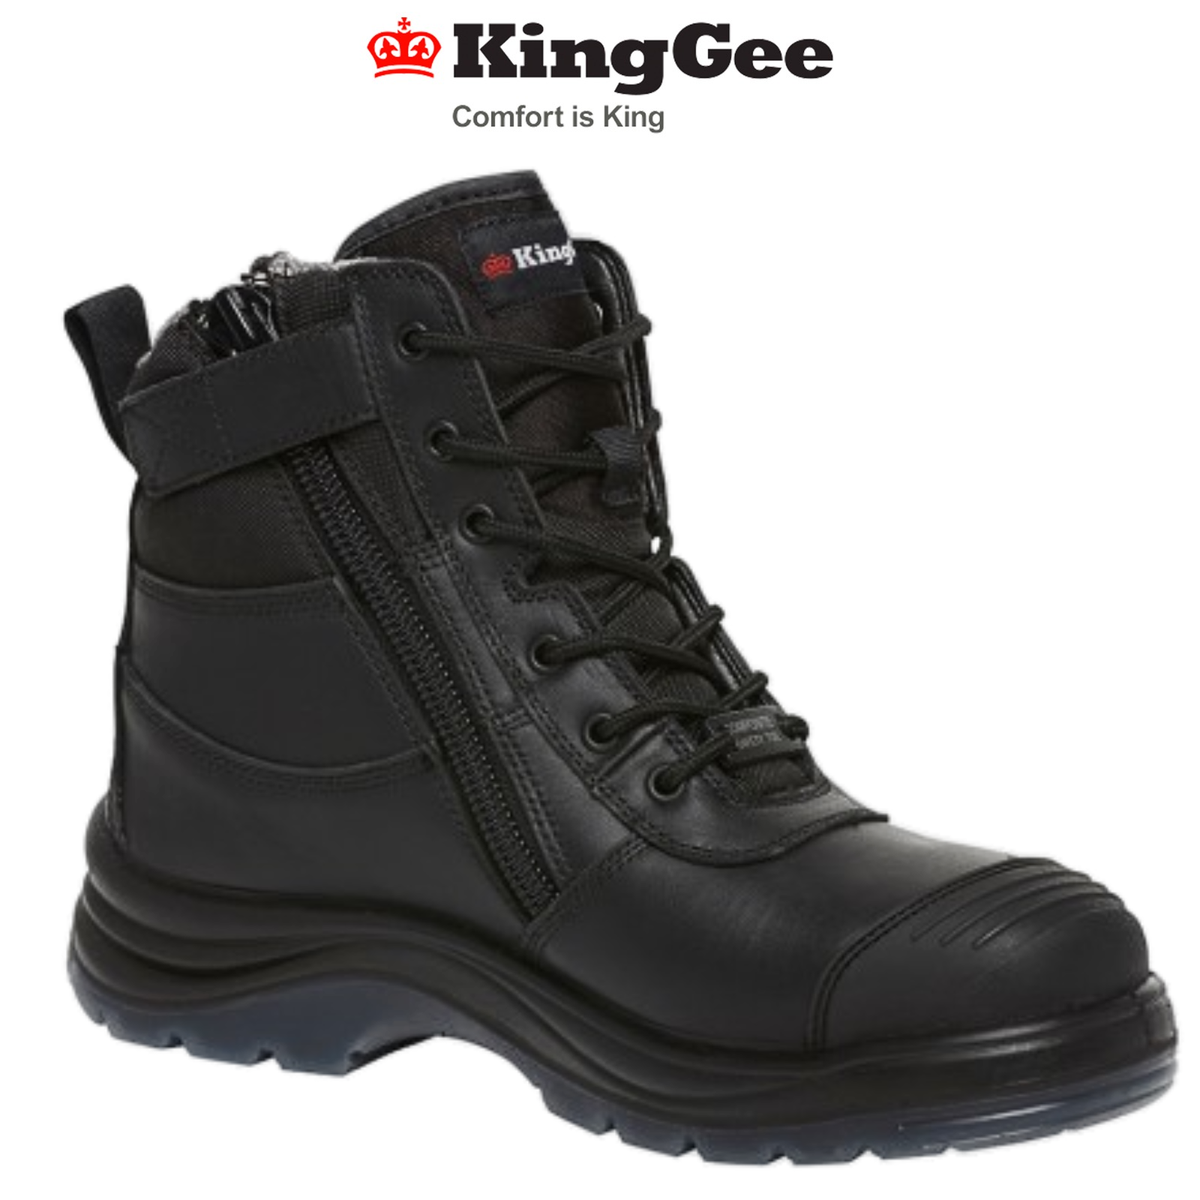 KingGee Mens Tradie 6CZ EH Electrical Hazard Protect Work Safety Boots K27155